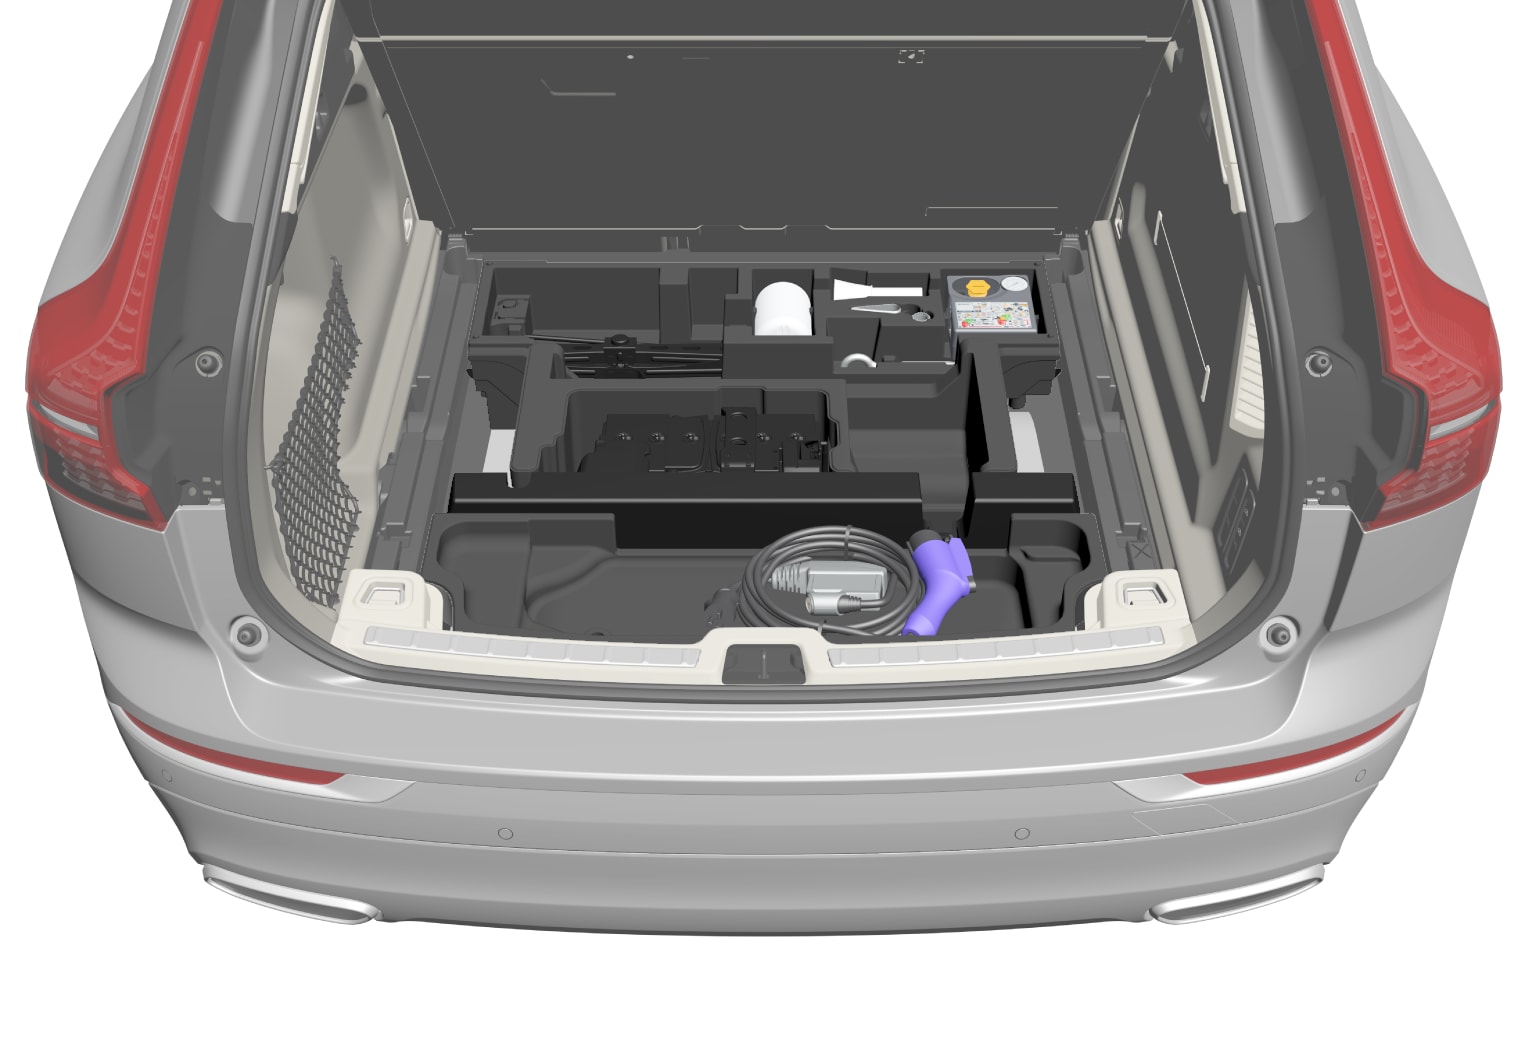 P5-1717-XC60-Tools in loading area